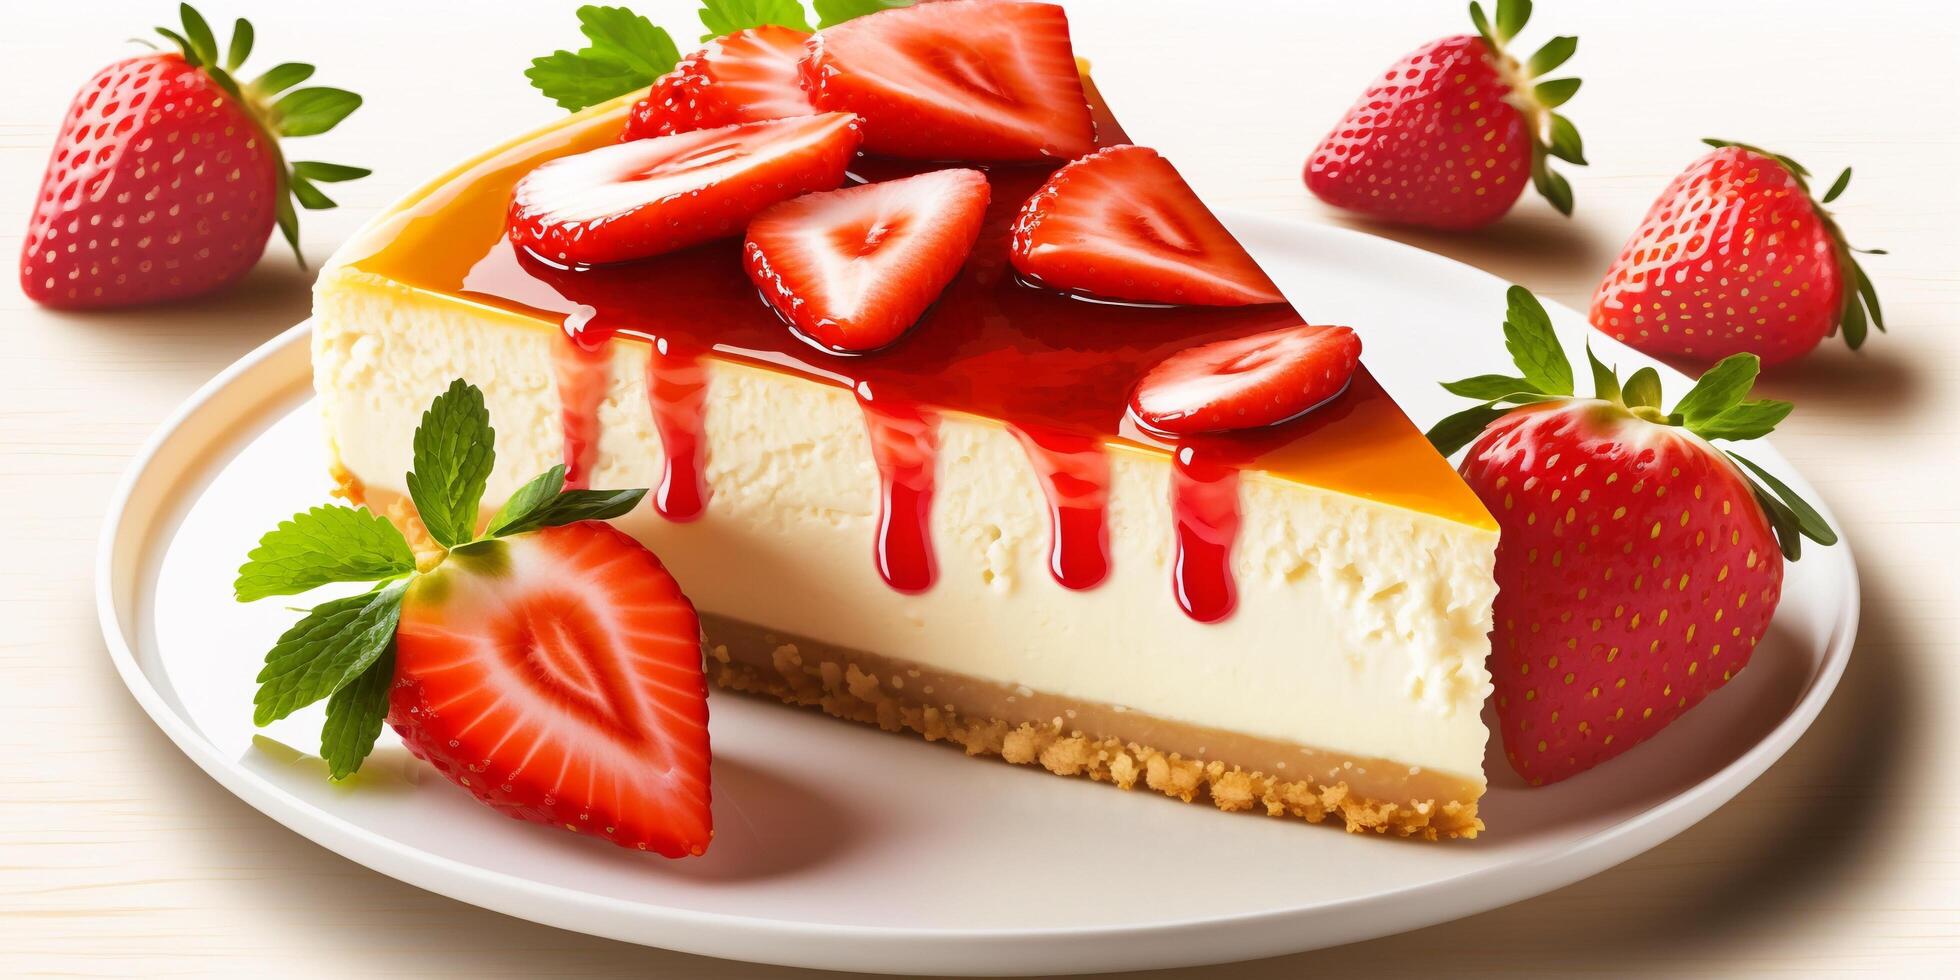 The strawberry cheesecake on the white dish with . photo